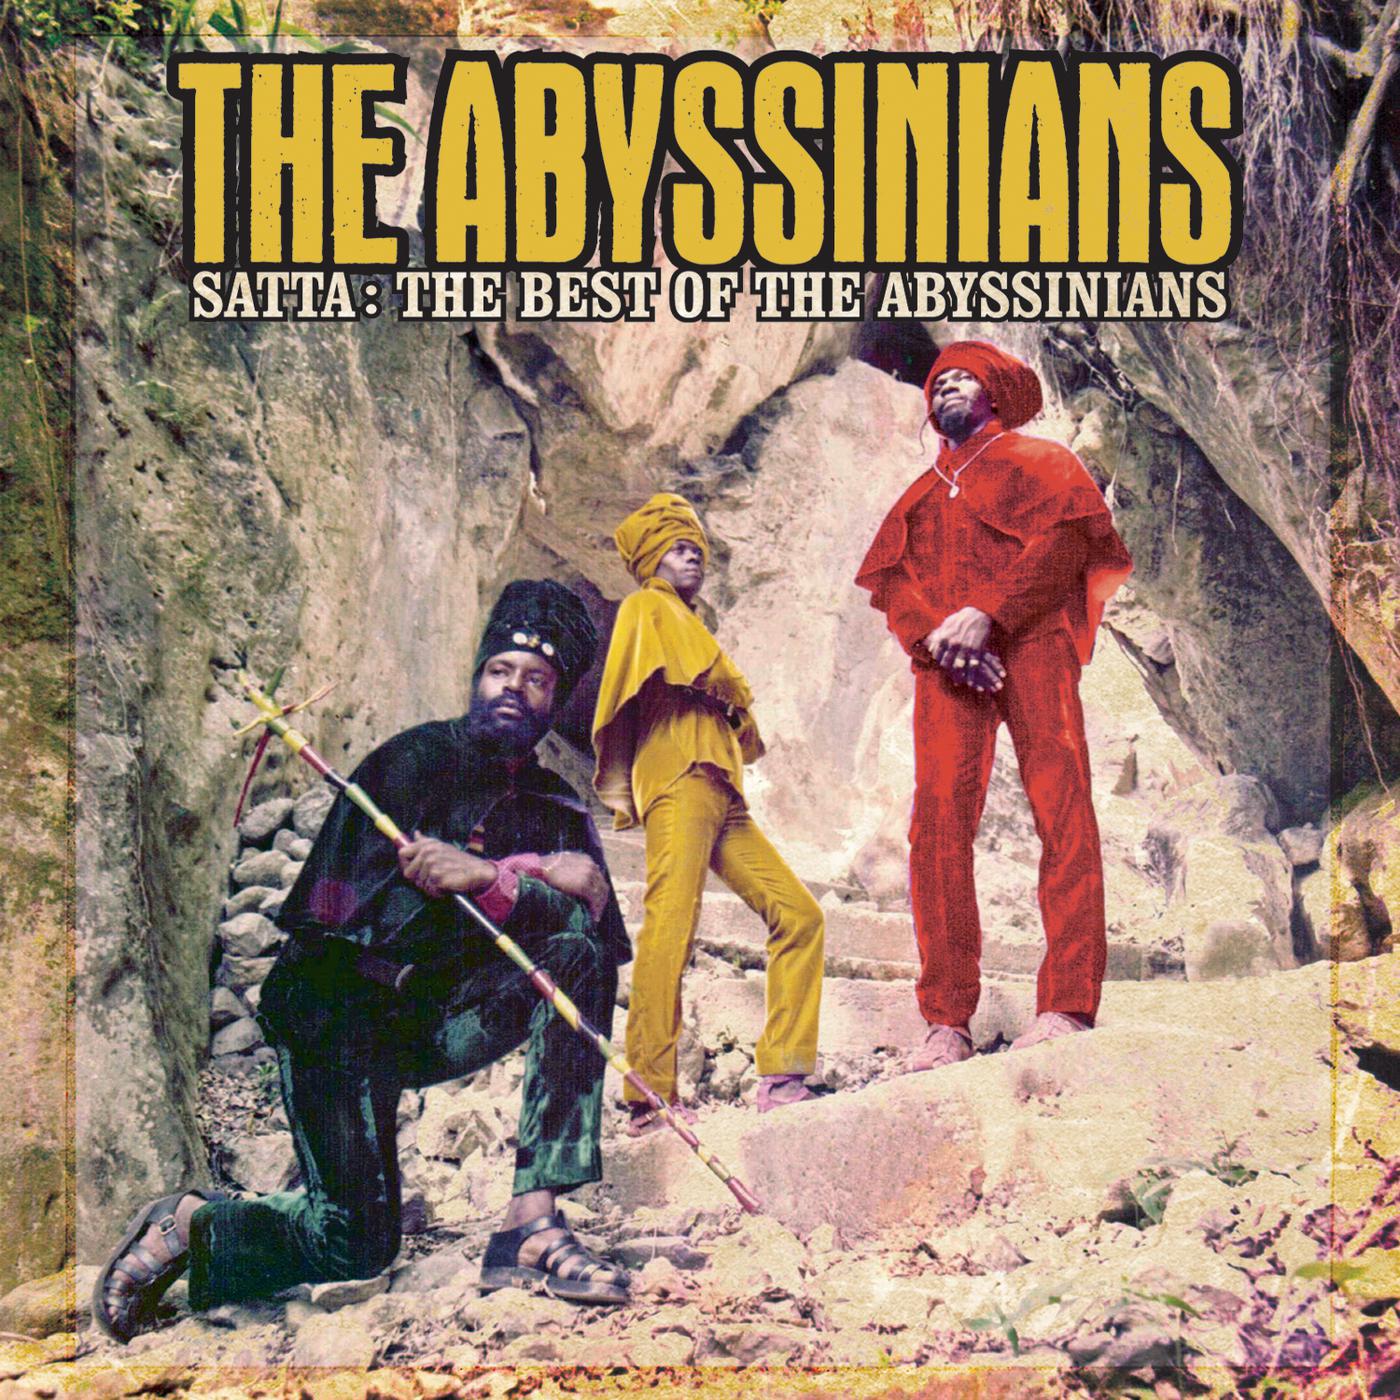 Love comes and goes. The Abyssinians. Wicked Beasts and other Bounties.